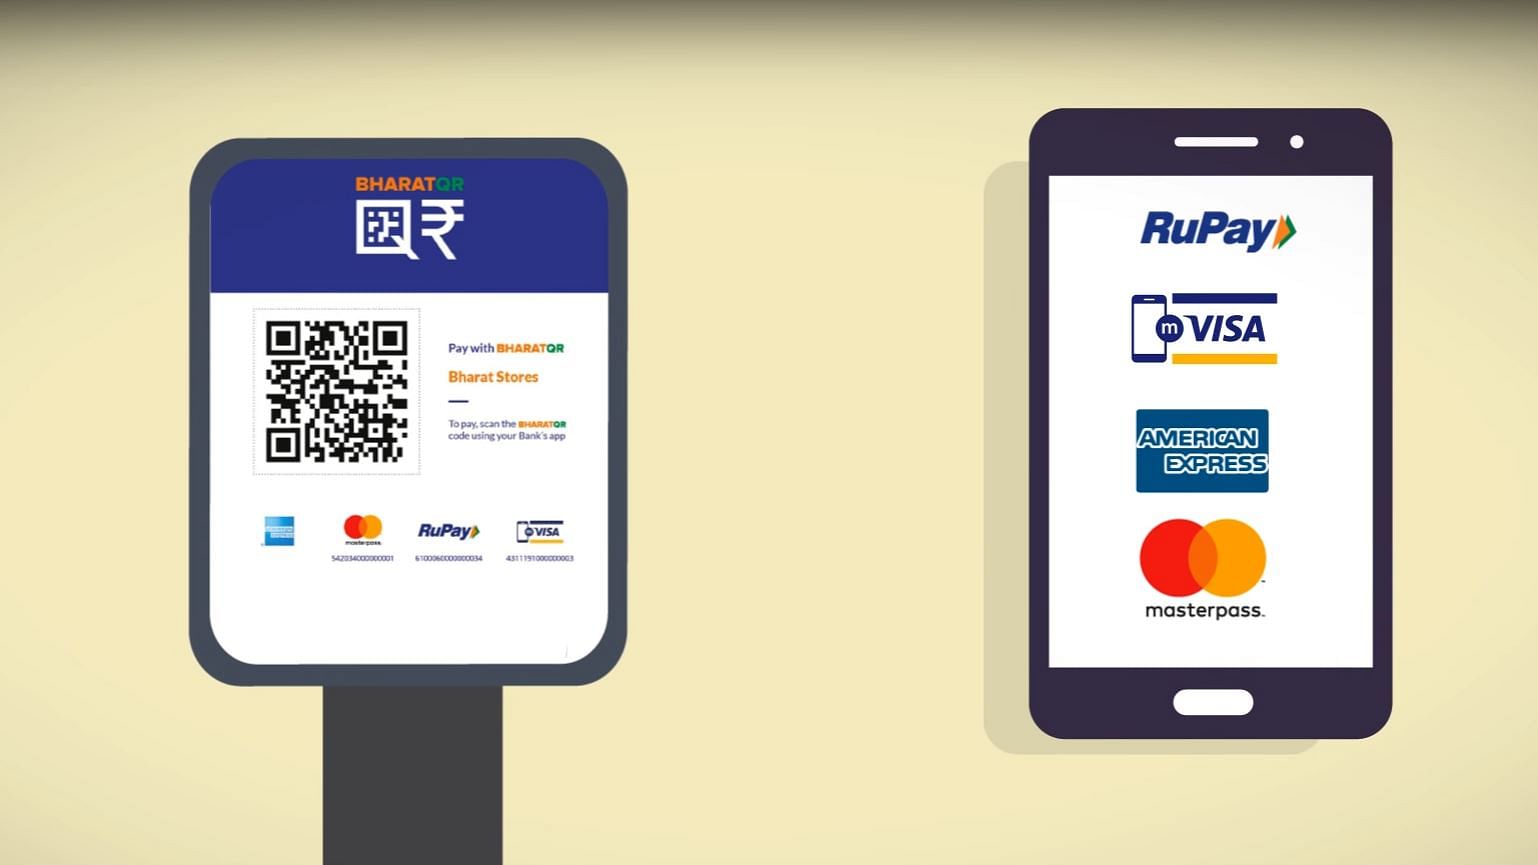 BharatQR payment solution has been launched in India. (Photo: YouTube/<a href="https://www.youtube.com/watch?v=bYyVlZoWQ7w">NPCI</a>)